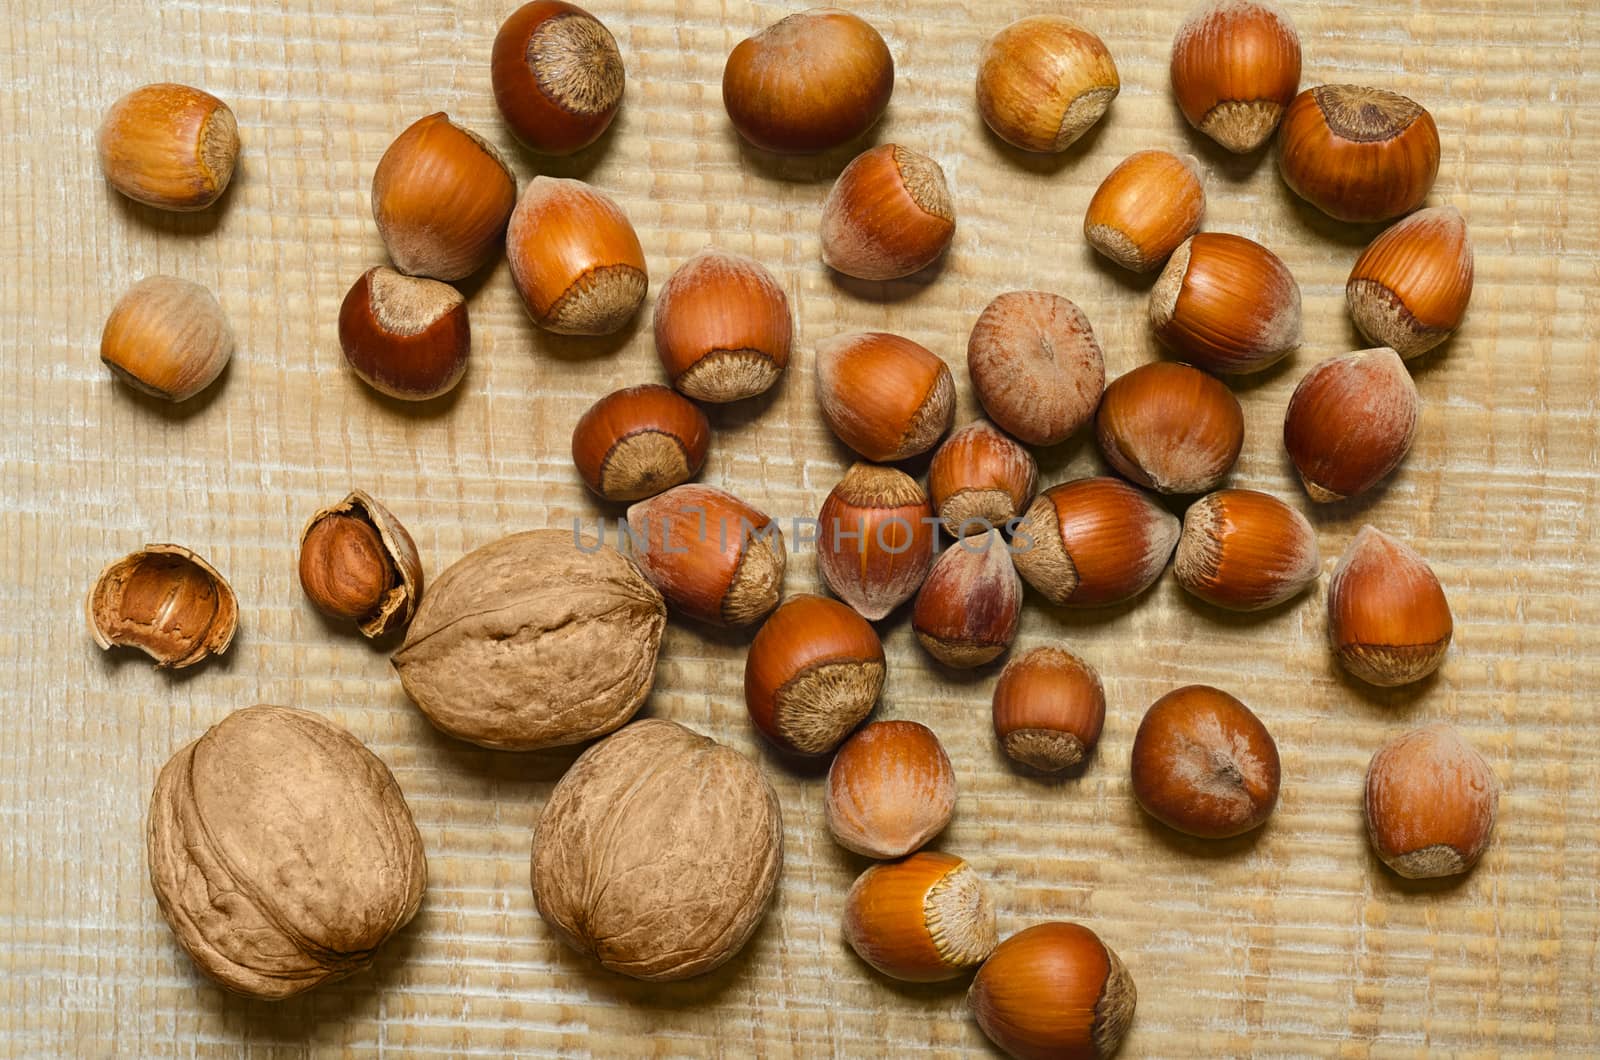 Hazelnuts and walnuts are scattered on wooden background.